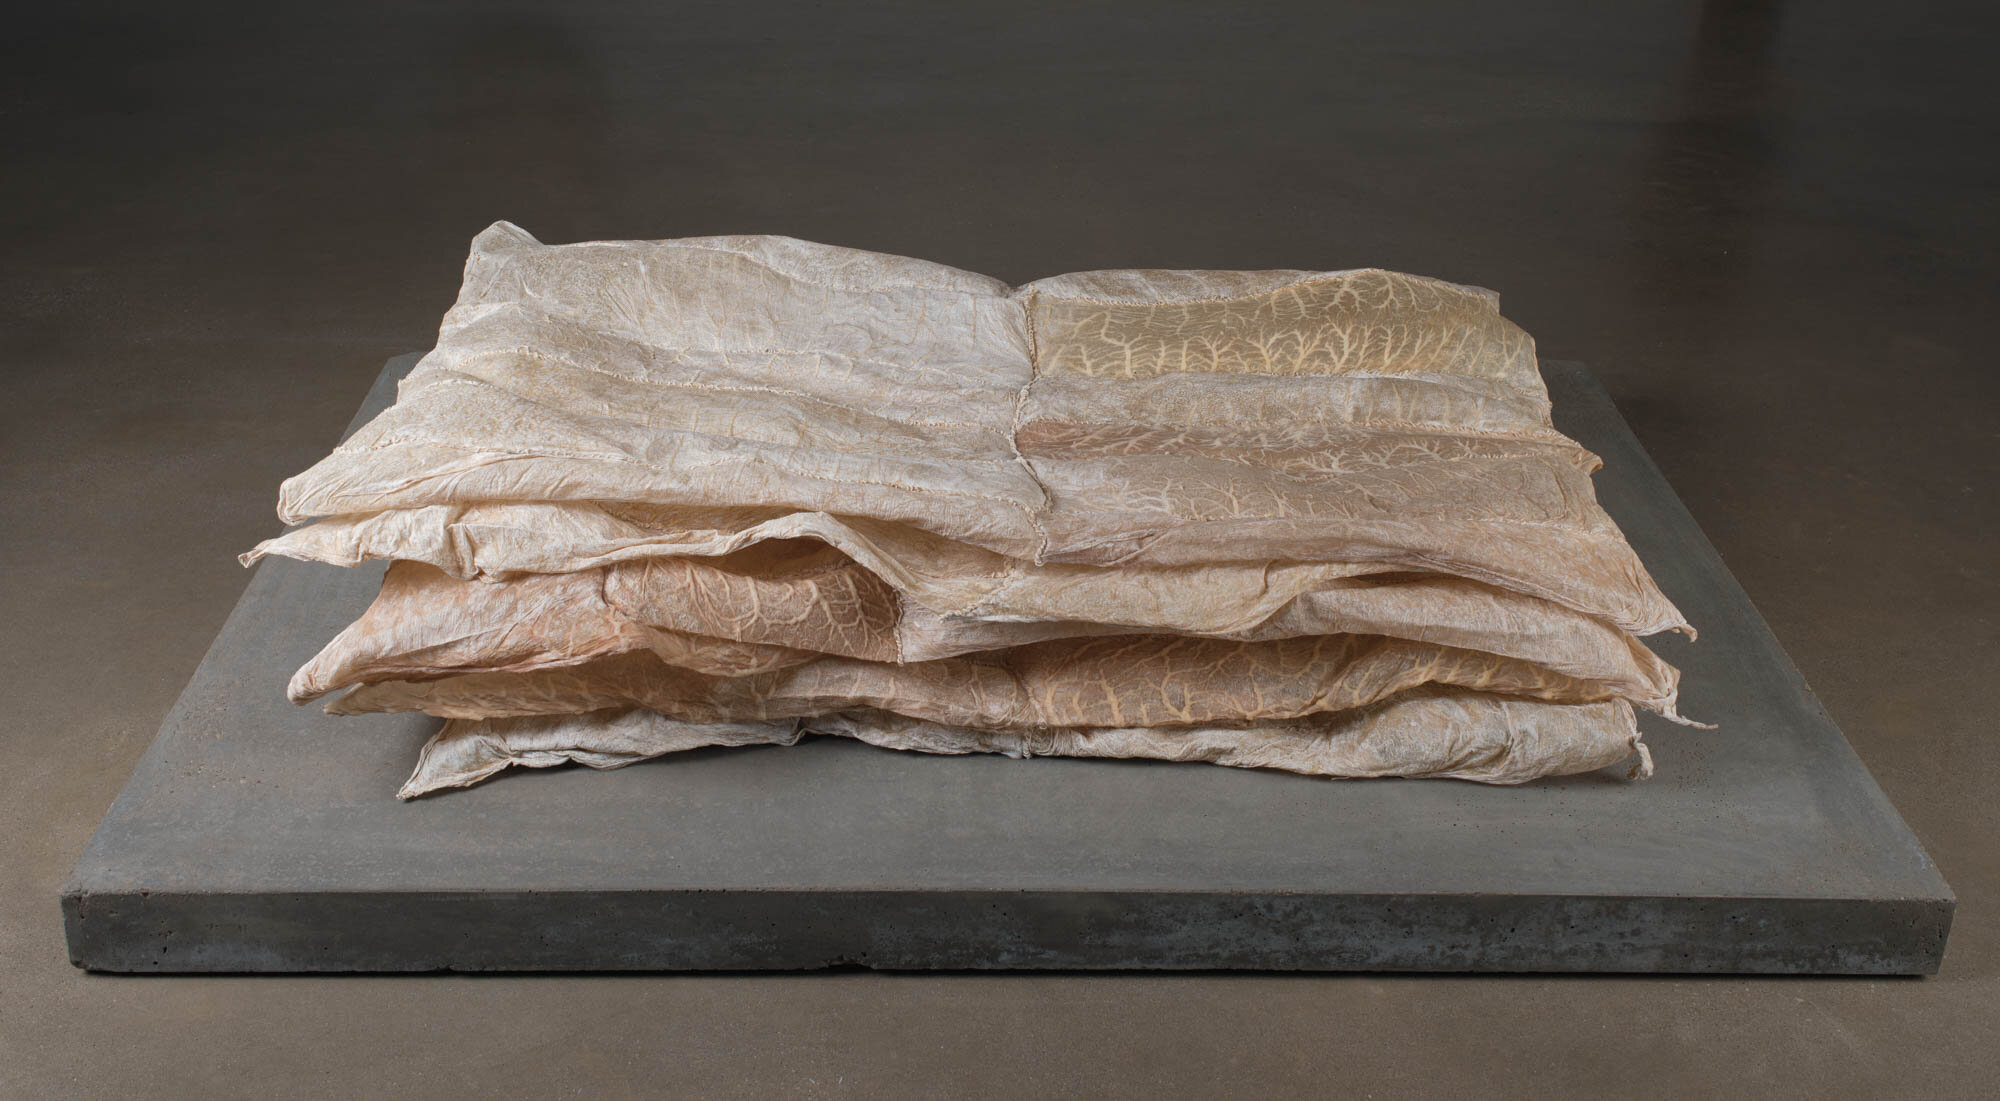       untitled (stacked blankets) , 2014 Cow intestines and string 11.25 x 65.125 x 44.625 in.    MORE IMAGES   The Fabric Workshop and Museum  